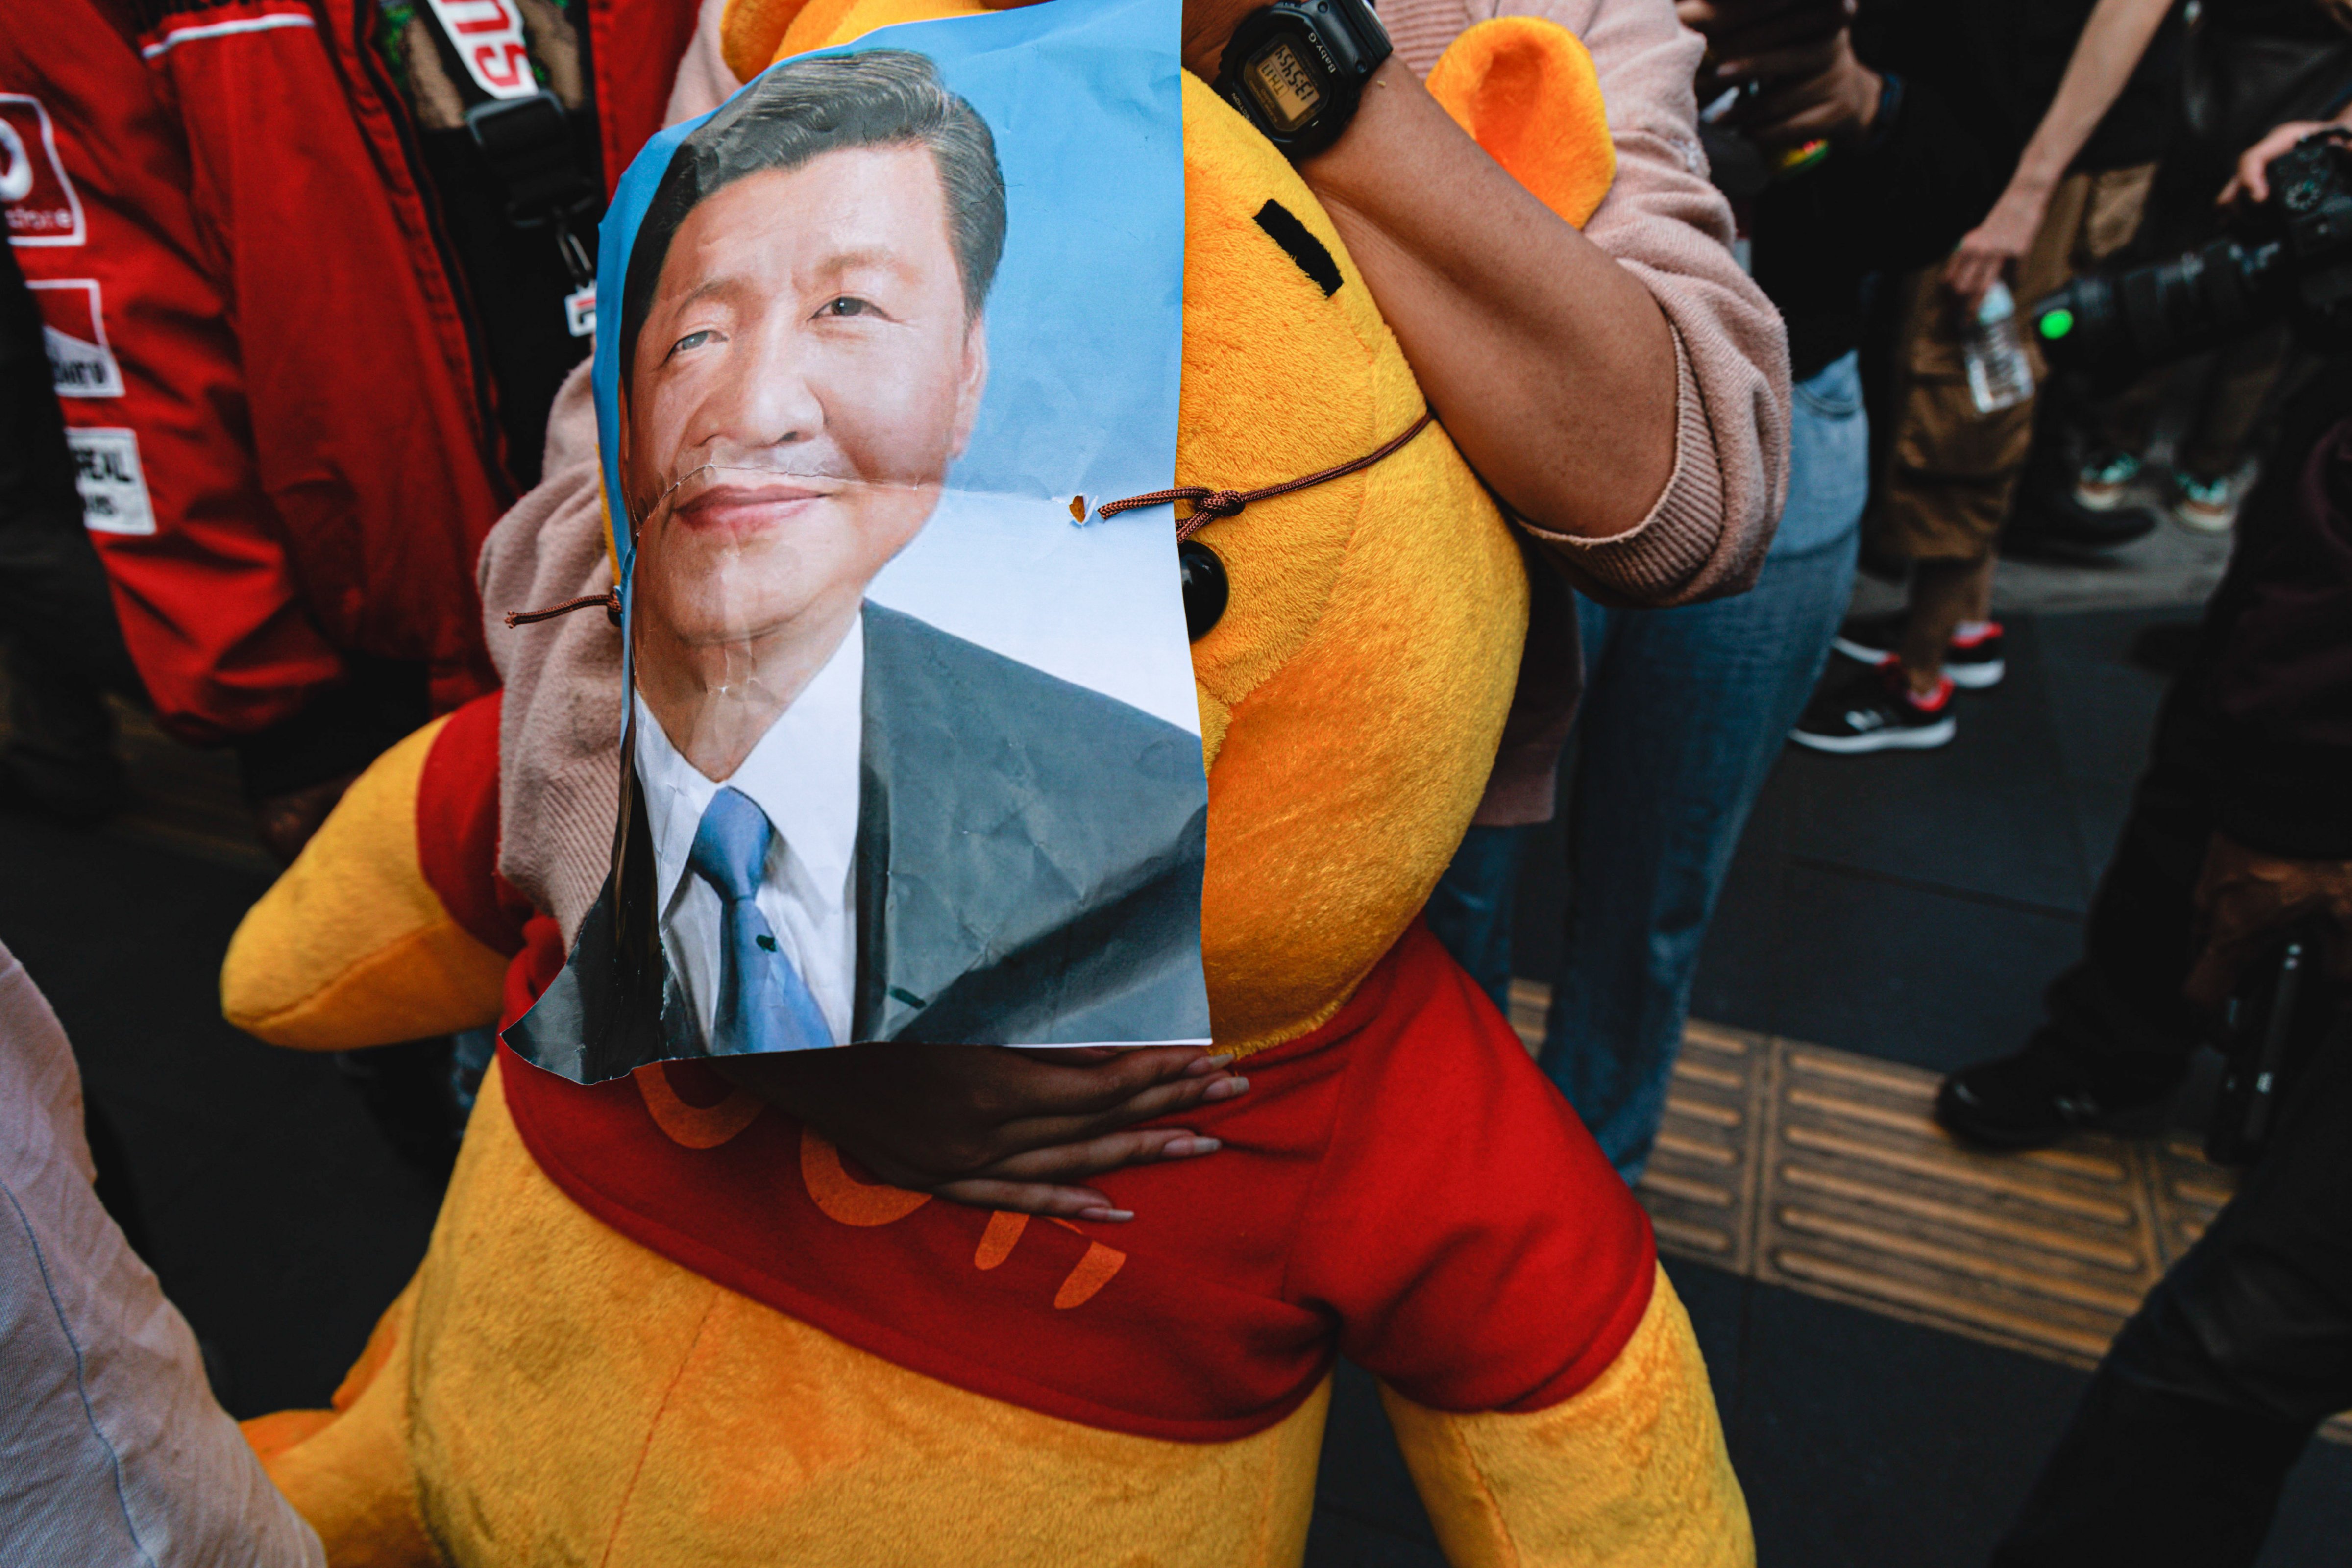 A protester holds a poster of Xi Jinping and a Pooh plush during a demonstration in Bangkok, where the Chinese leader was attending APEC in November 2022. (Varuth Pongsapipatt—SOPA/LightRocket/Getty Images)